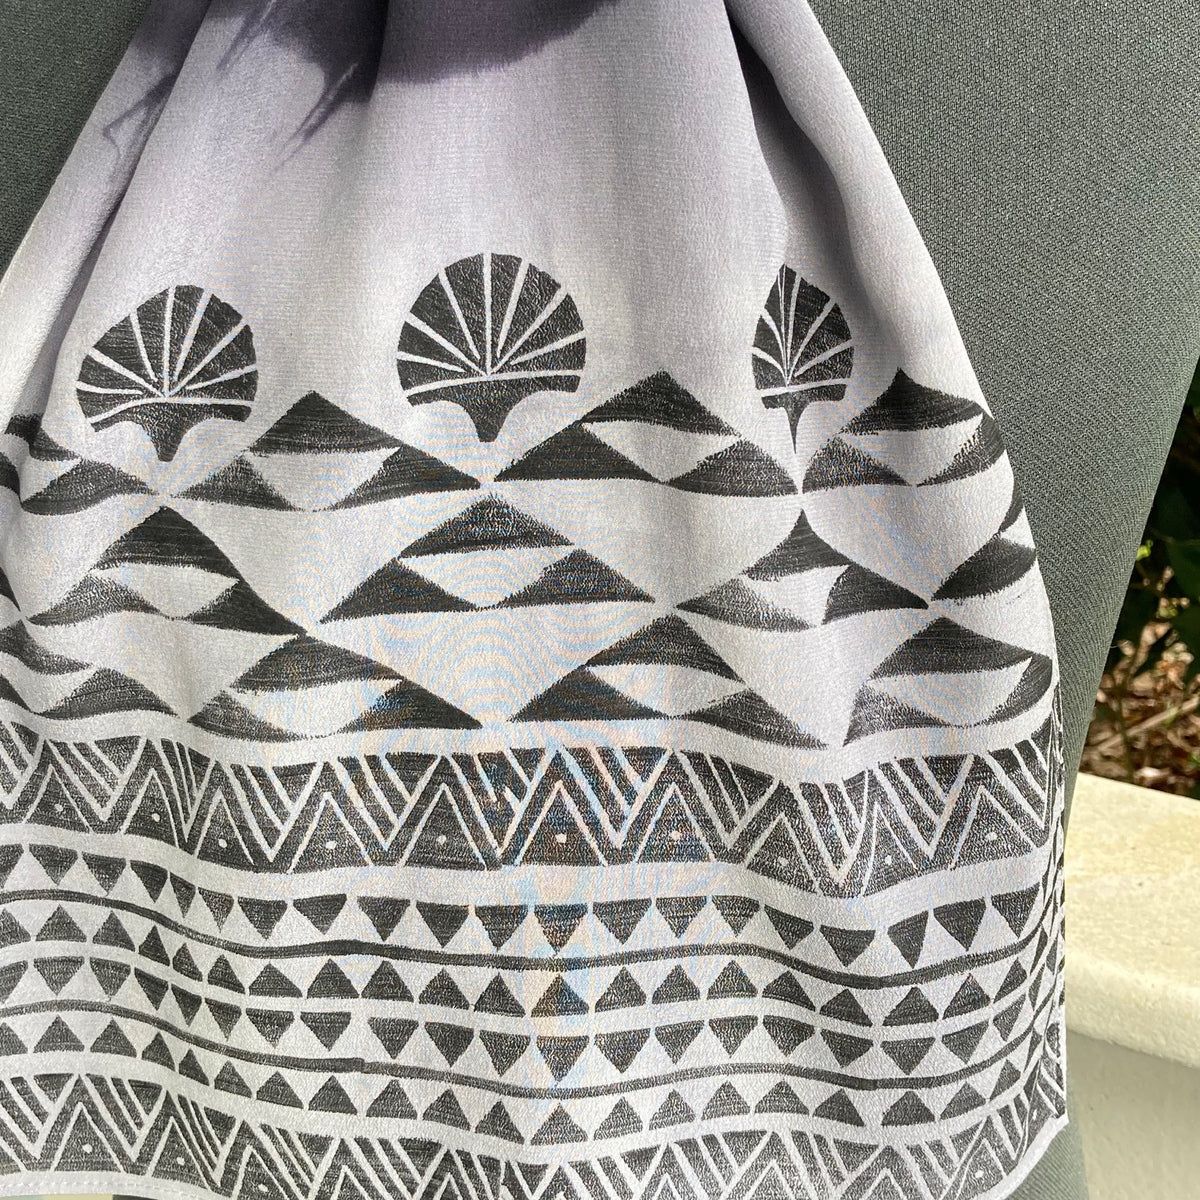 Ohe Kapala Silk Crepe Scarf in Black and White with Mauna and Lehua